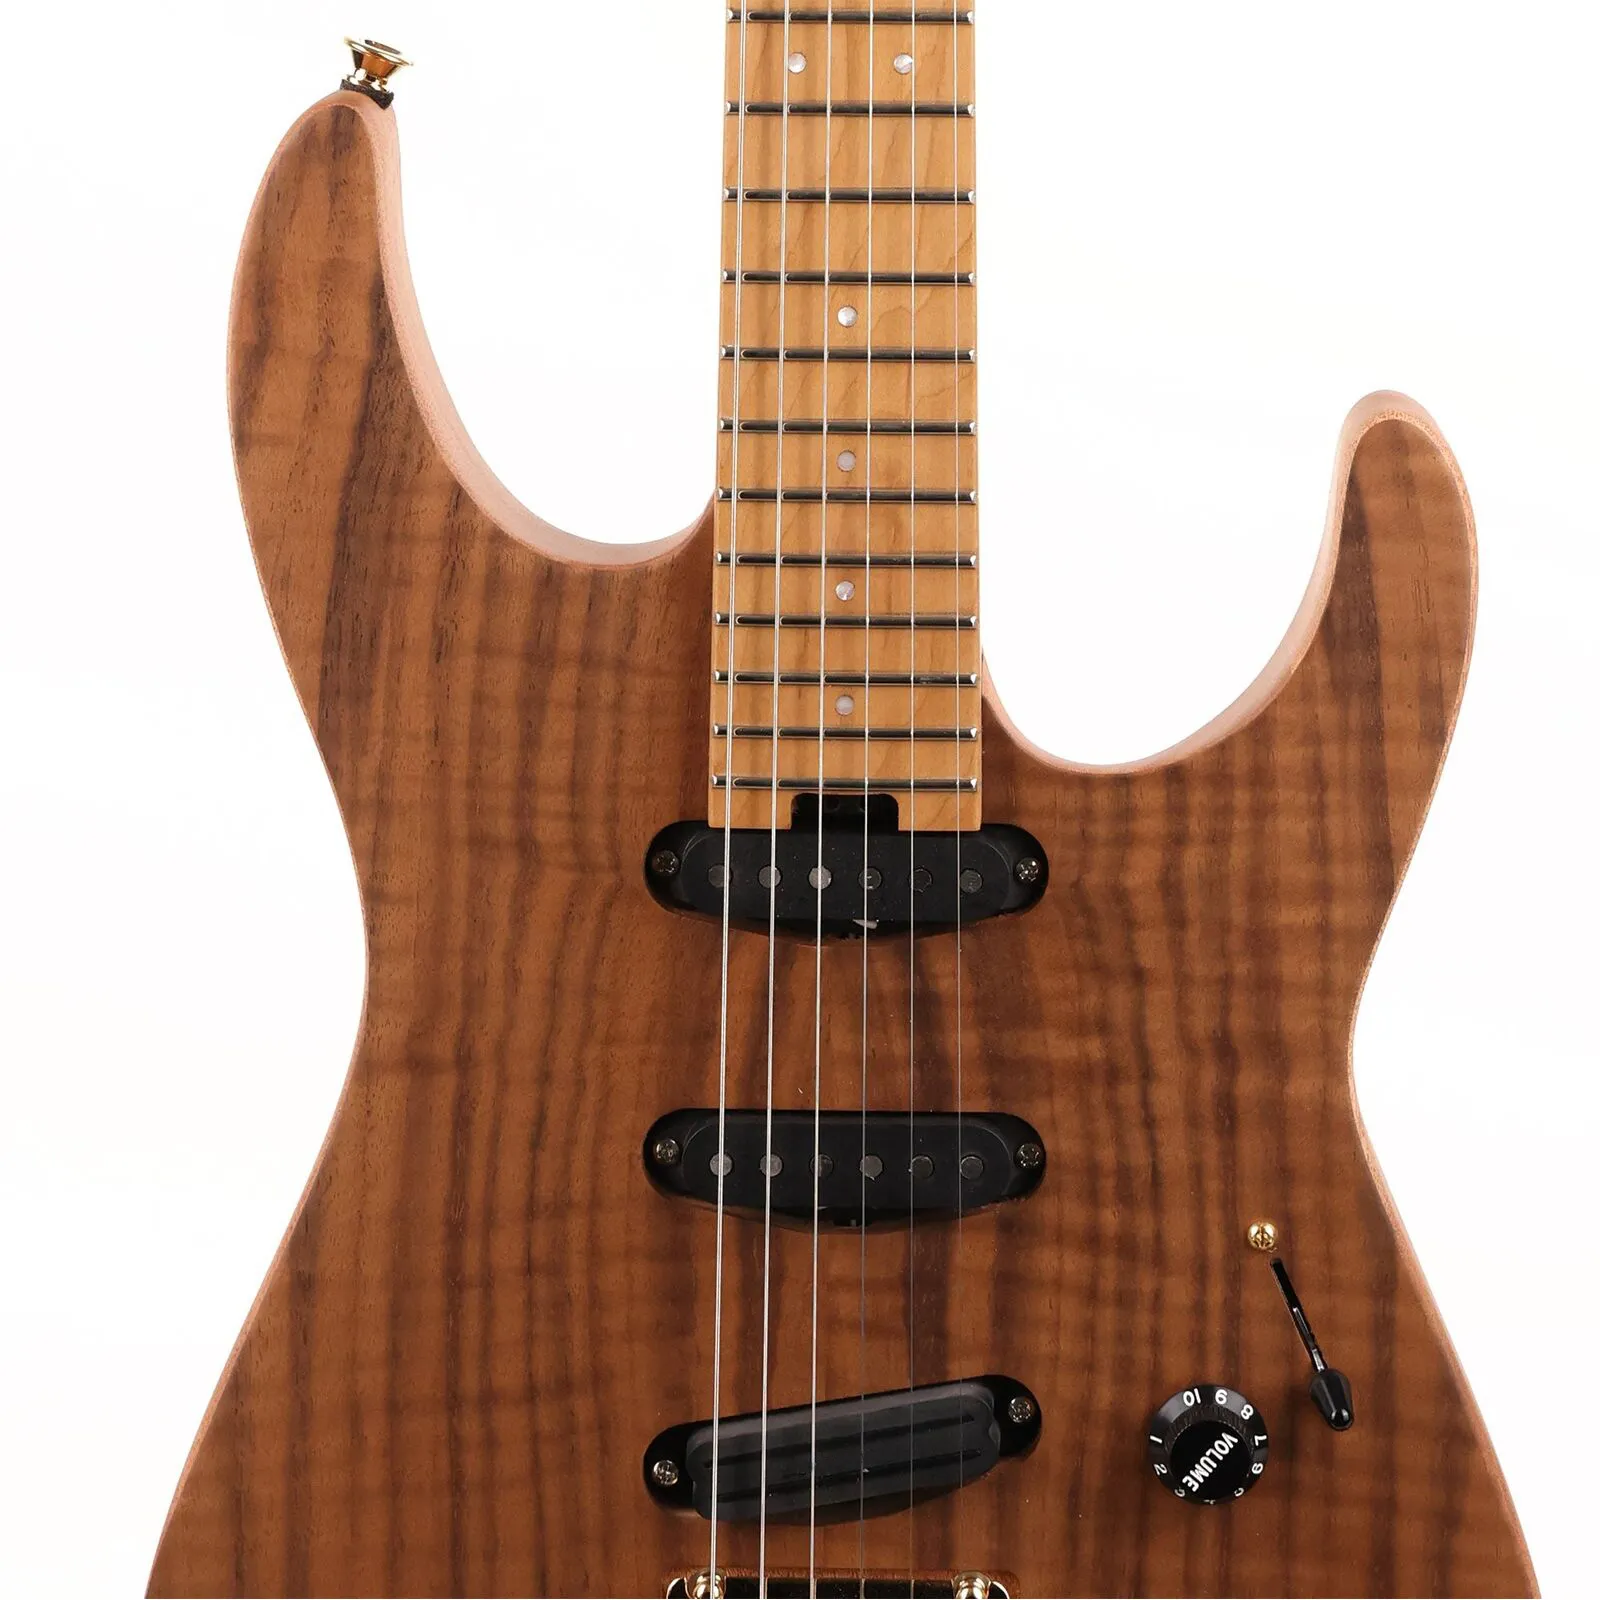 Ch arvel Pro-Mod DK22 SSS 2PT CM Mahogany with Walnut Natural Electric Guitar as same of the pictures